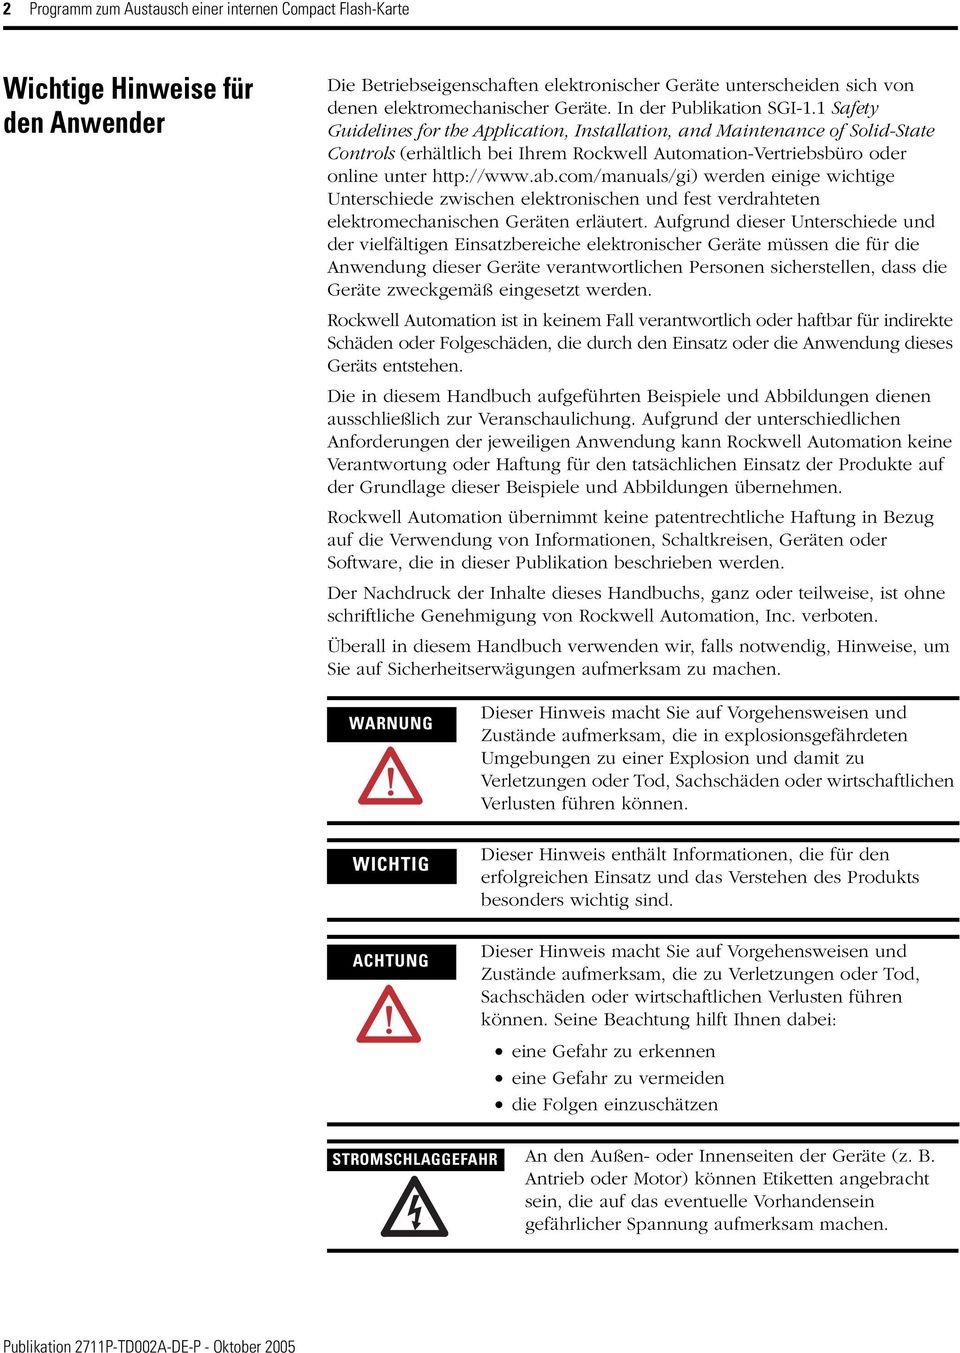 1 Safety Guidelines for the Application, Installation, and Maintenance of Solid-State Controls (erhältlich bei Ihrem Rockwell Automation-Vertriebsbüro oder online unter http://www.ab.